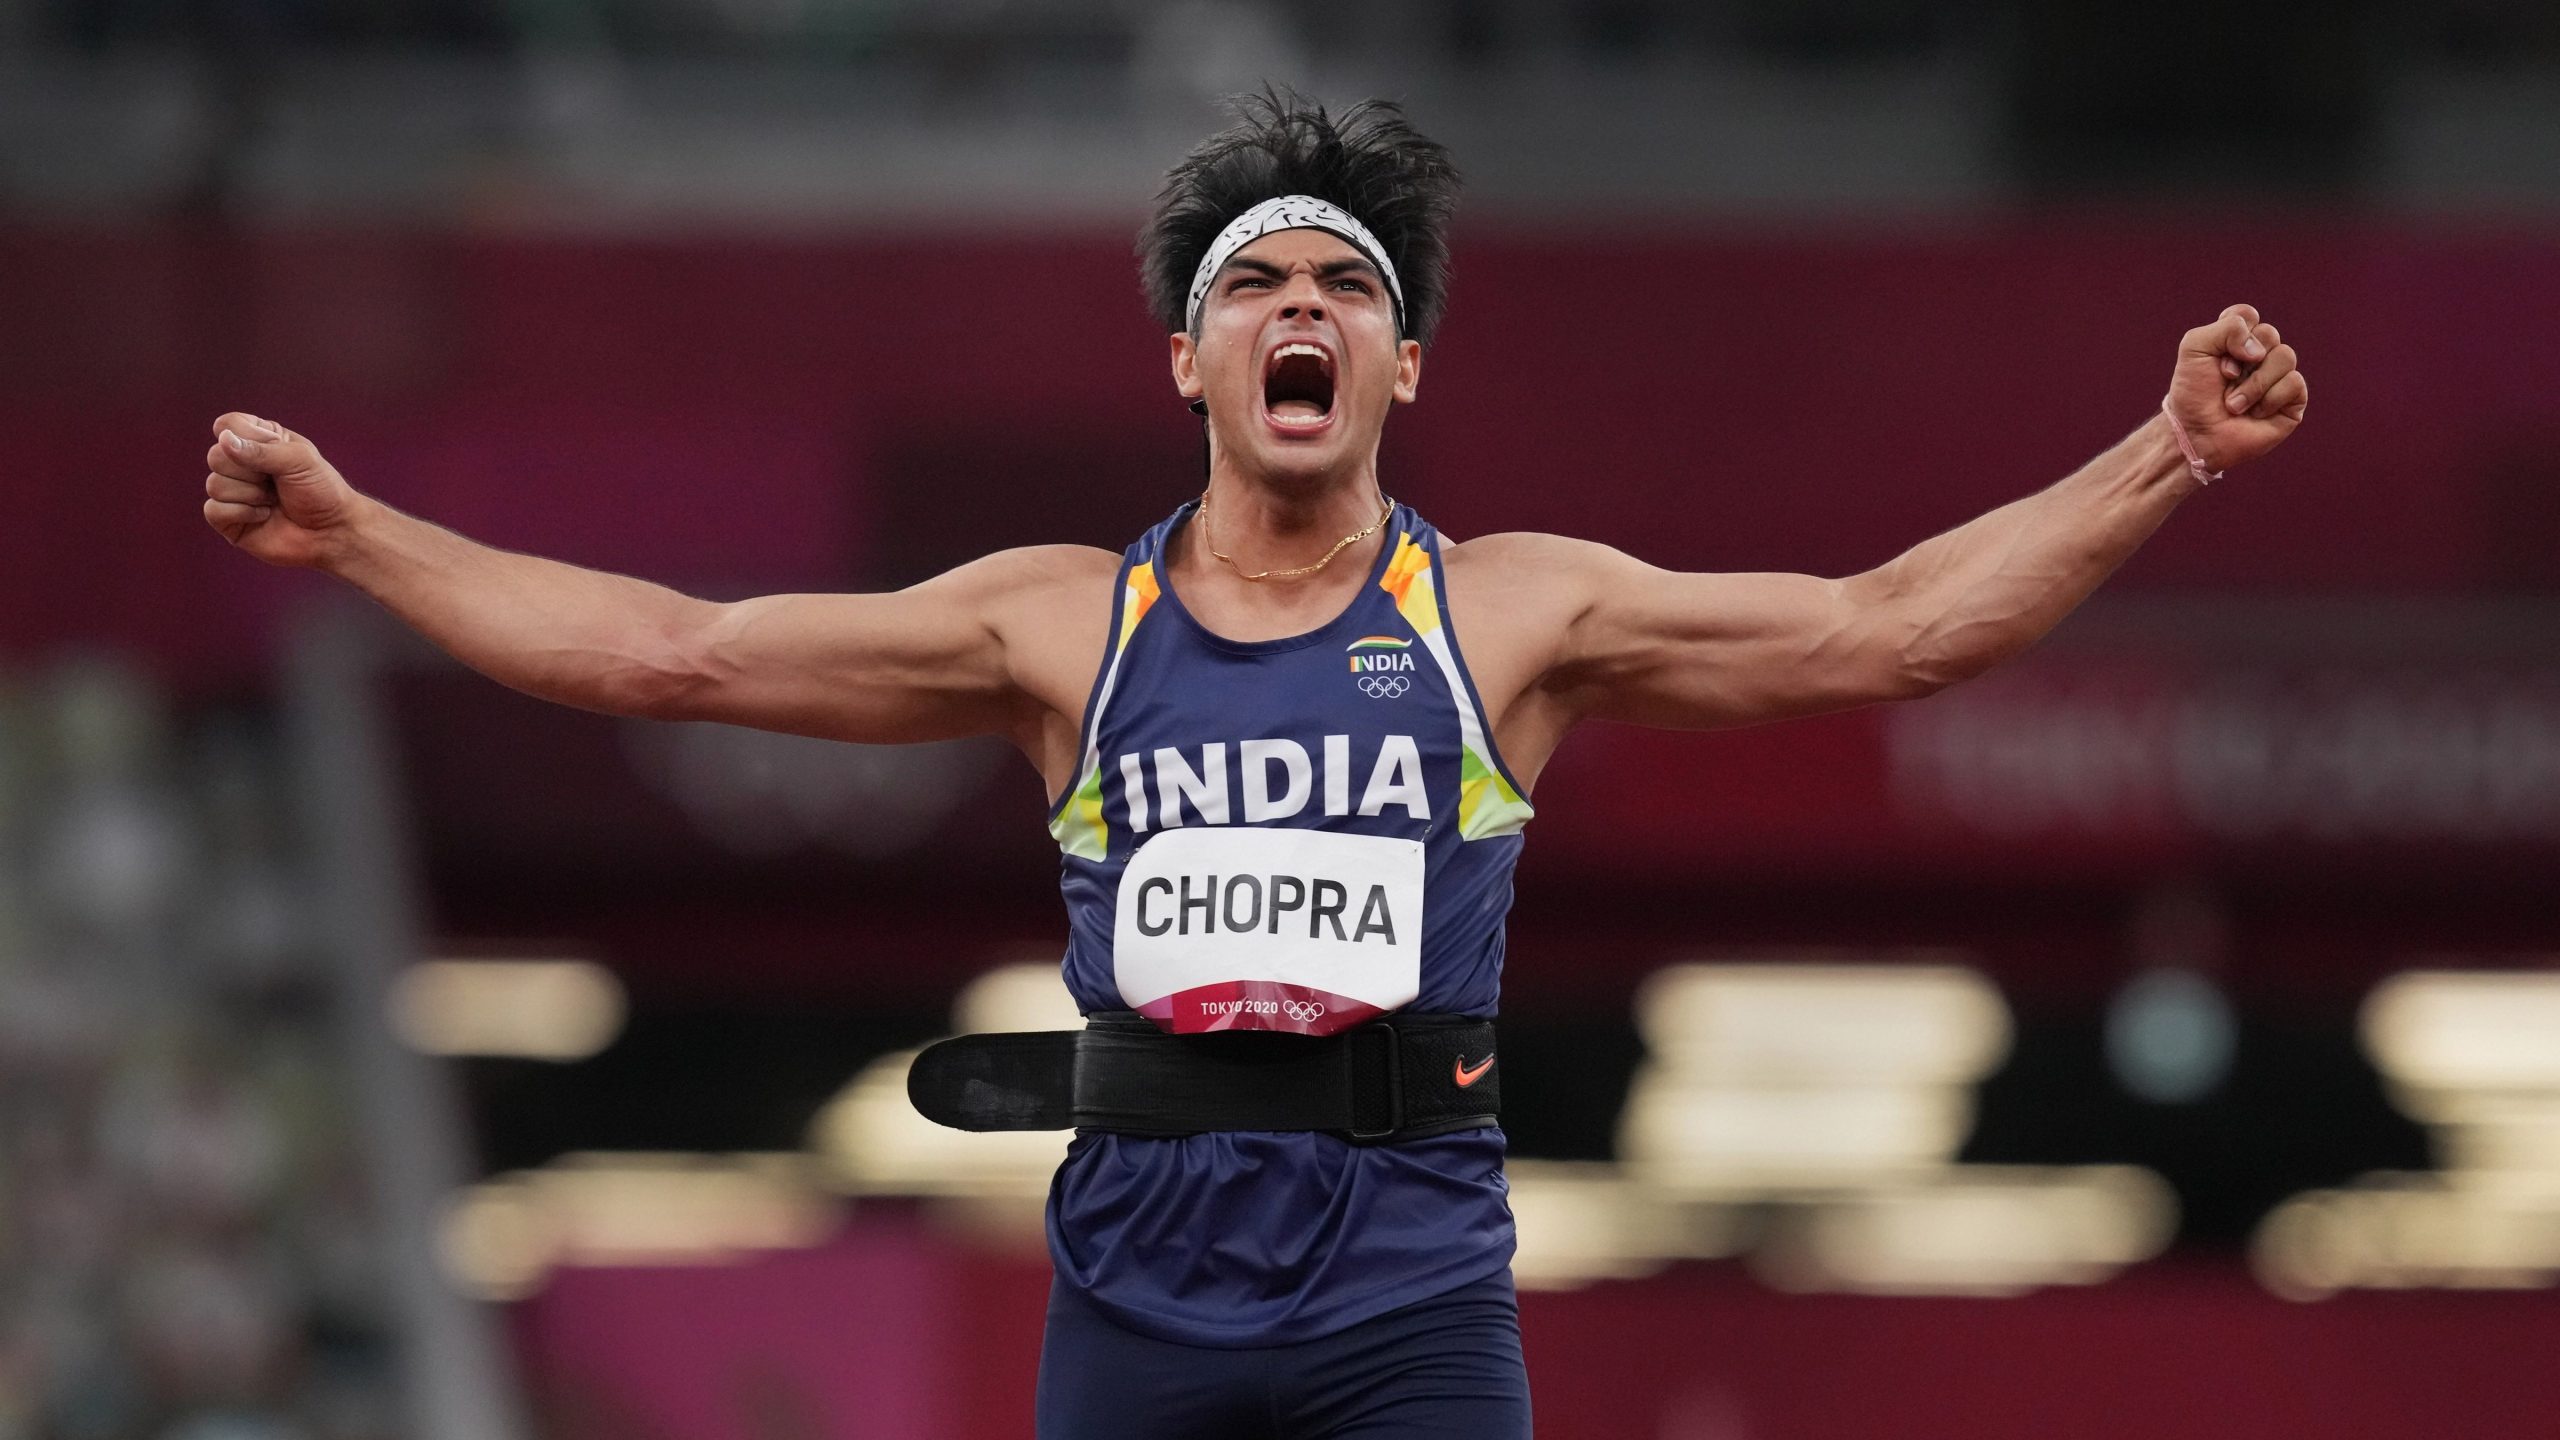 Neeraj Chopra bags gold for India at Tokyo Olympics by winning javelin throw event